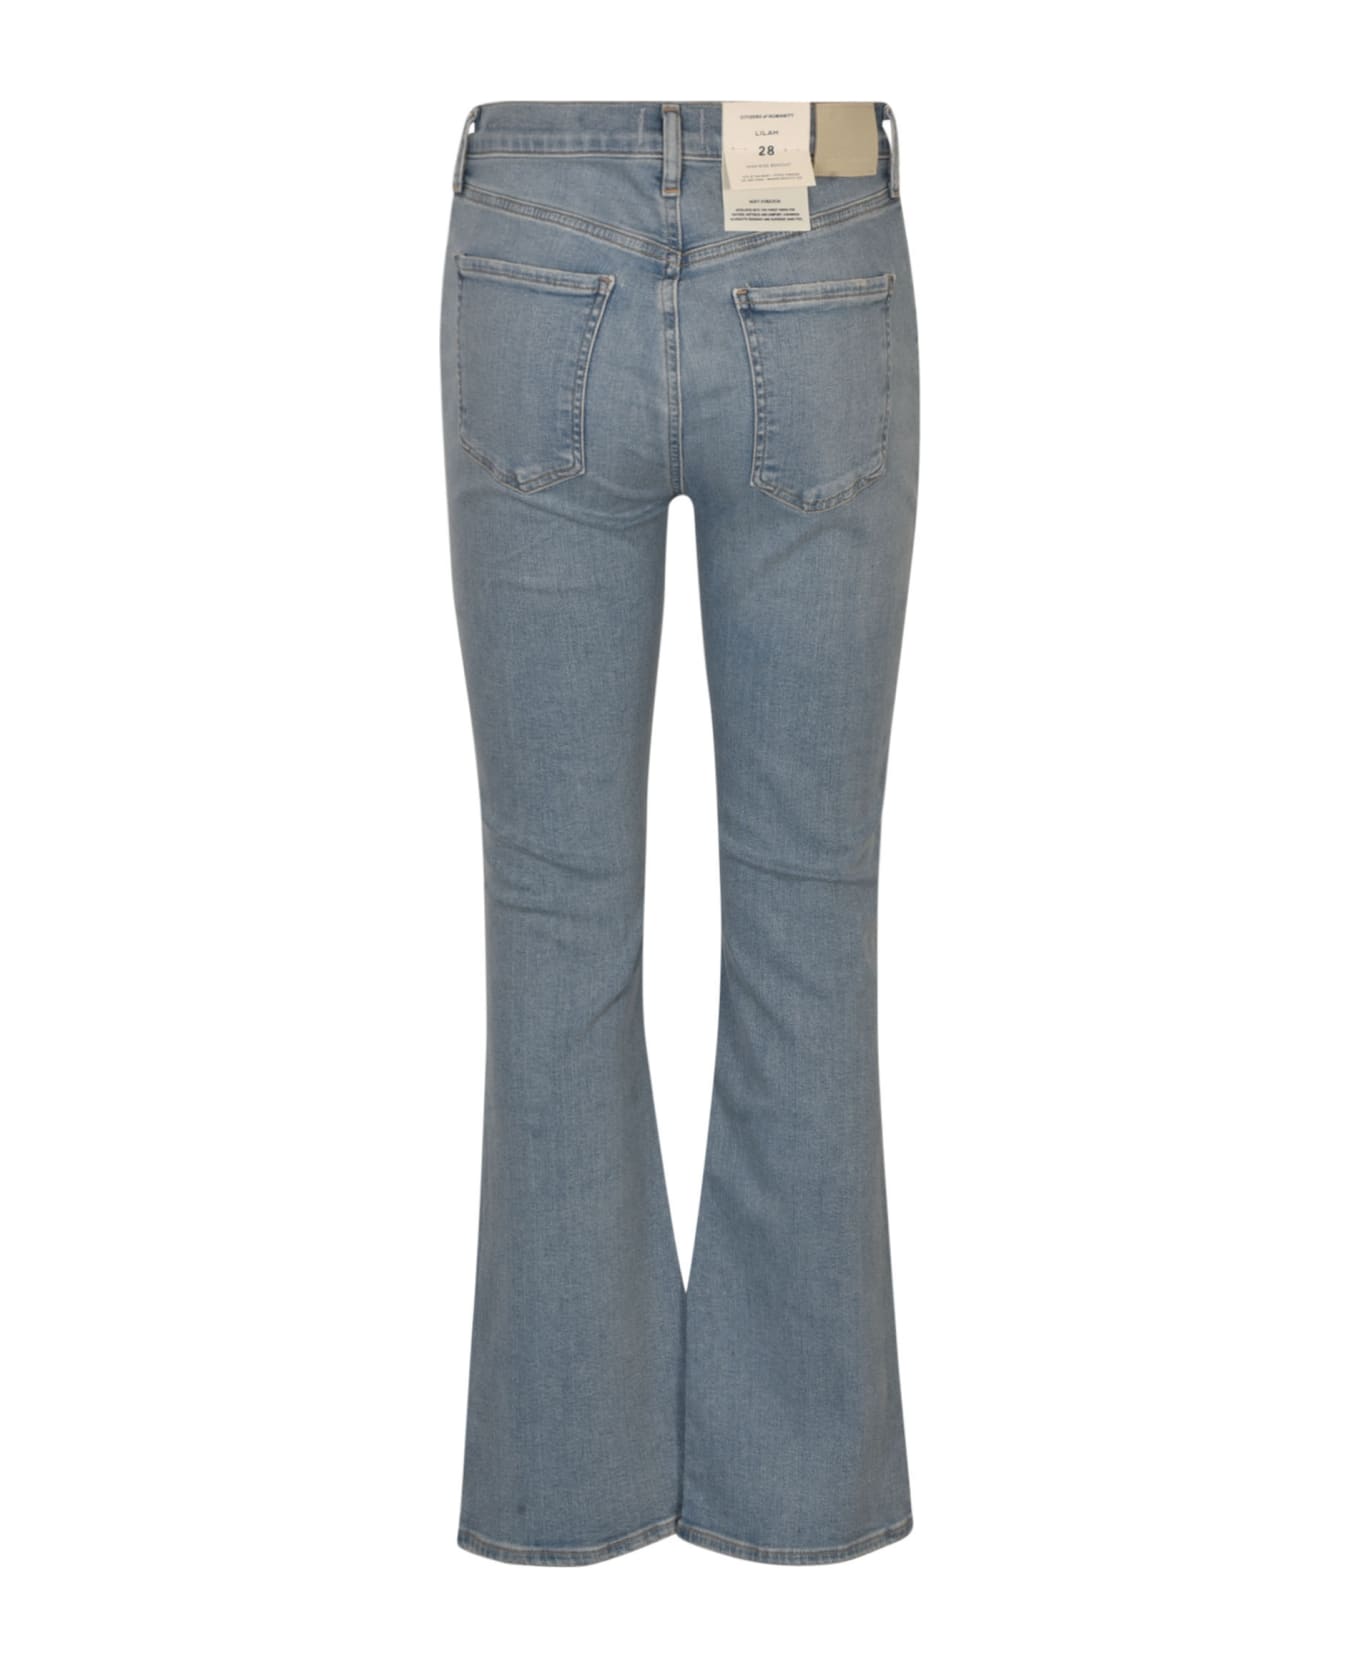 Citizens of Humanity Lilah High Rise Bootcut Jeans - LYRIC デニム